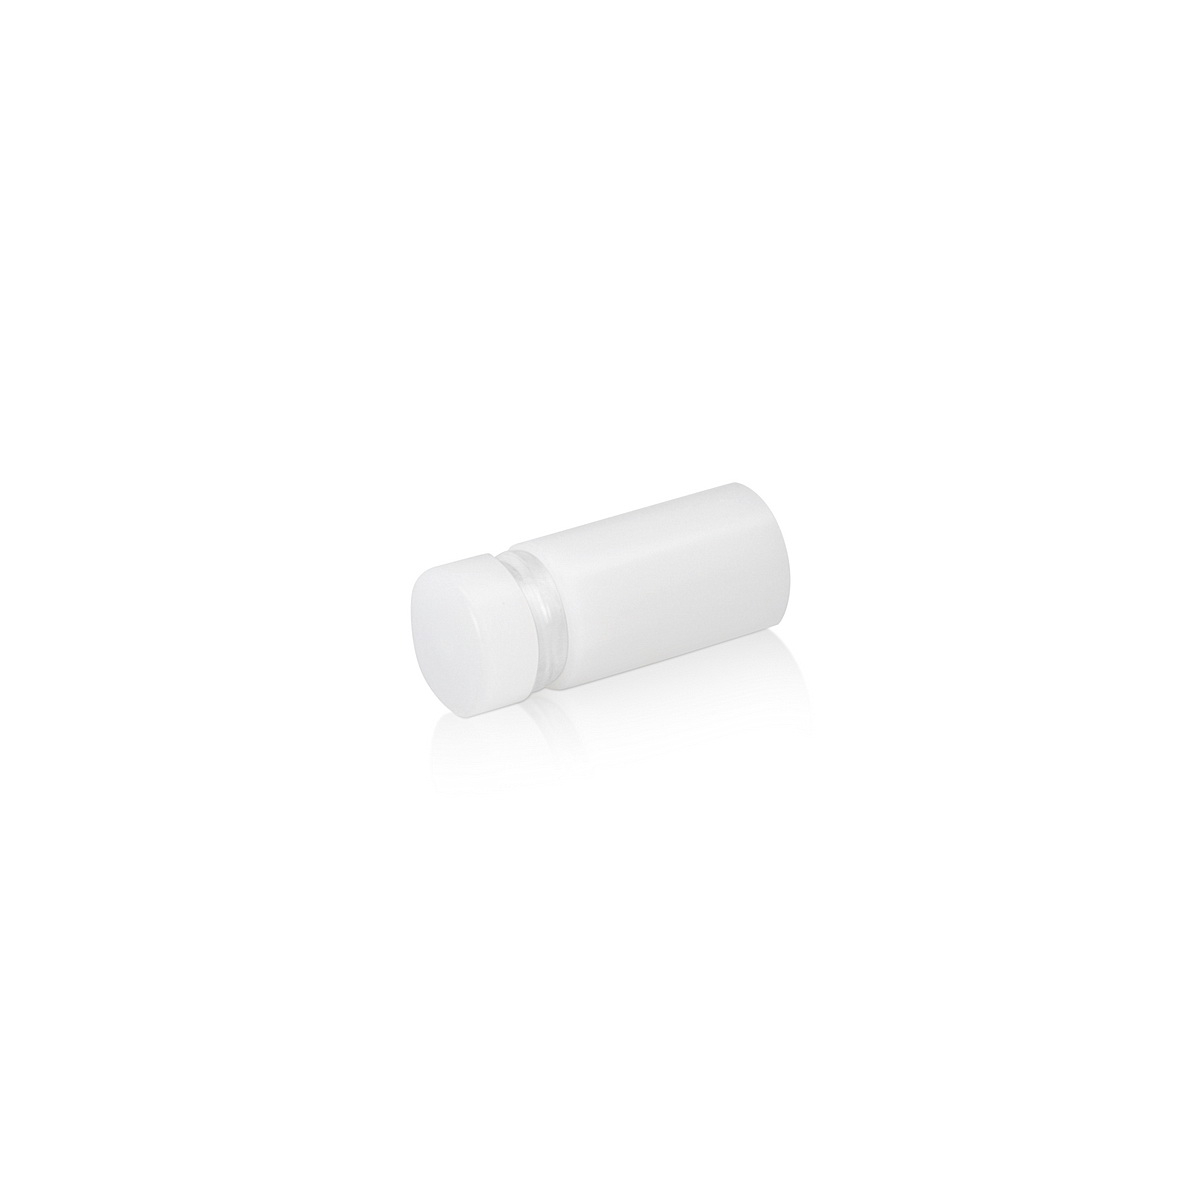 1/2'' Diameter X 3/4'' Barrel Length, White Acrylic Standoff. Easy Fasten Standoff (For Inside Use Only) Tamper Proof [Required Material Hole Size: 3/8'']